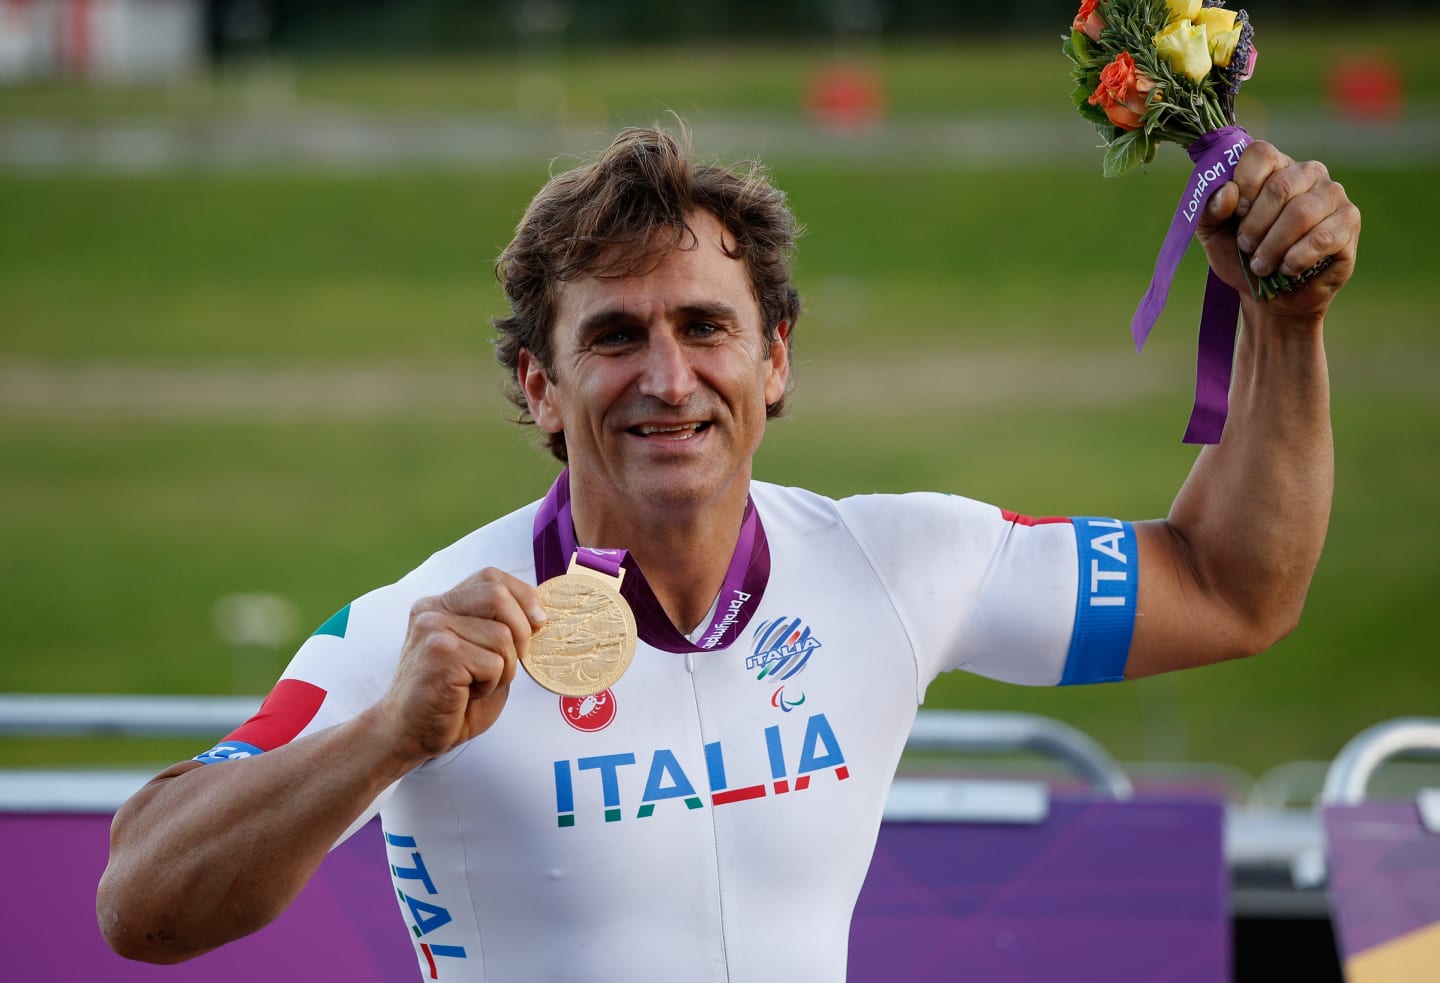 Showing incredible character and determination, Zanardi battled back to both the race track and to dominate a new sport. He's pictured here after winning Paralympic gold at London 2012 in hand cycling (Photo by Harry Engels/Getty Images)